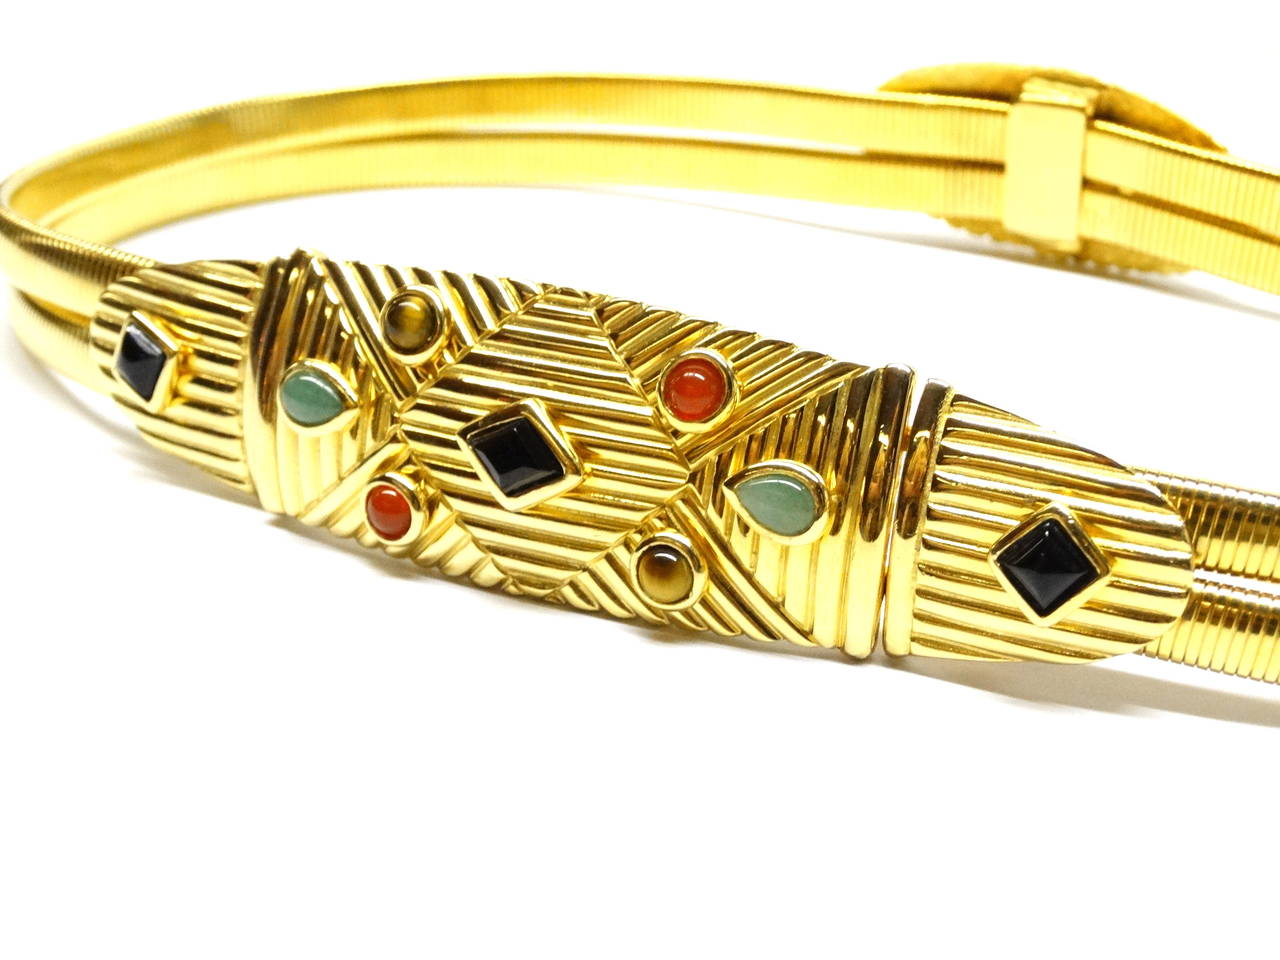 Women's 1970's Judith Leiber Gold Cord Belt with Semiprecious Cabochon Stones